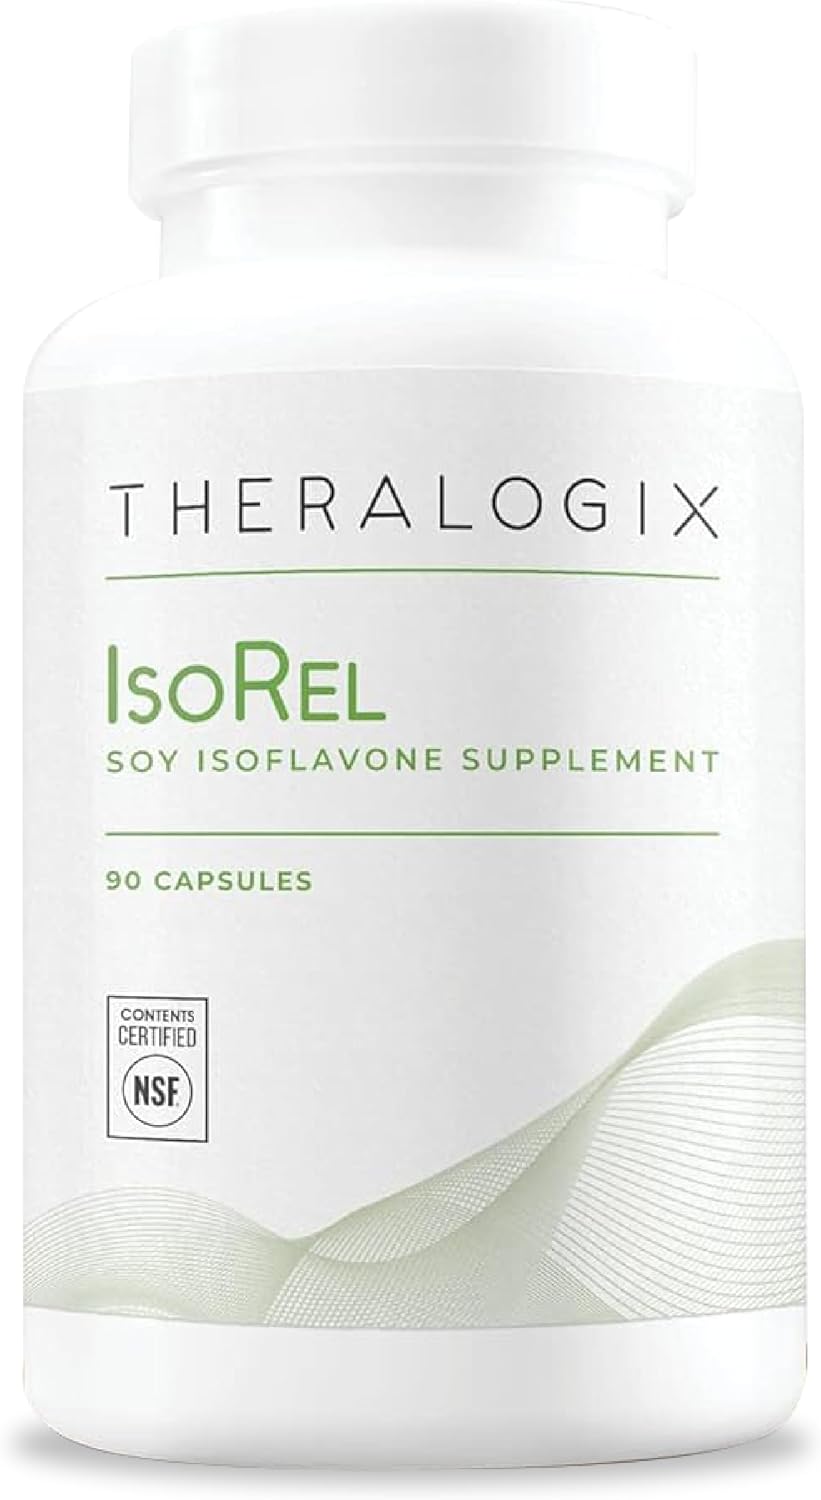 Theralogix IsoRel Whole Soybean Extract Supplement - 90-Day Supply - Menopause Support to Aid Hot Flashes - Prostate Health Support for Men - NSF Certified - 90 Capsules